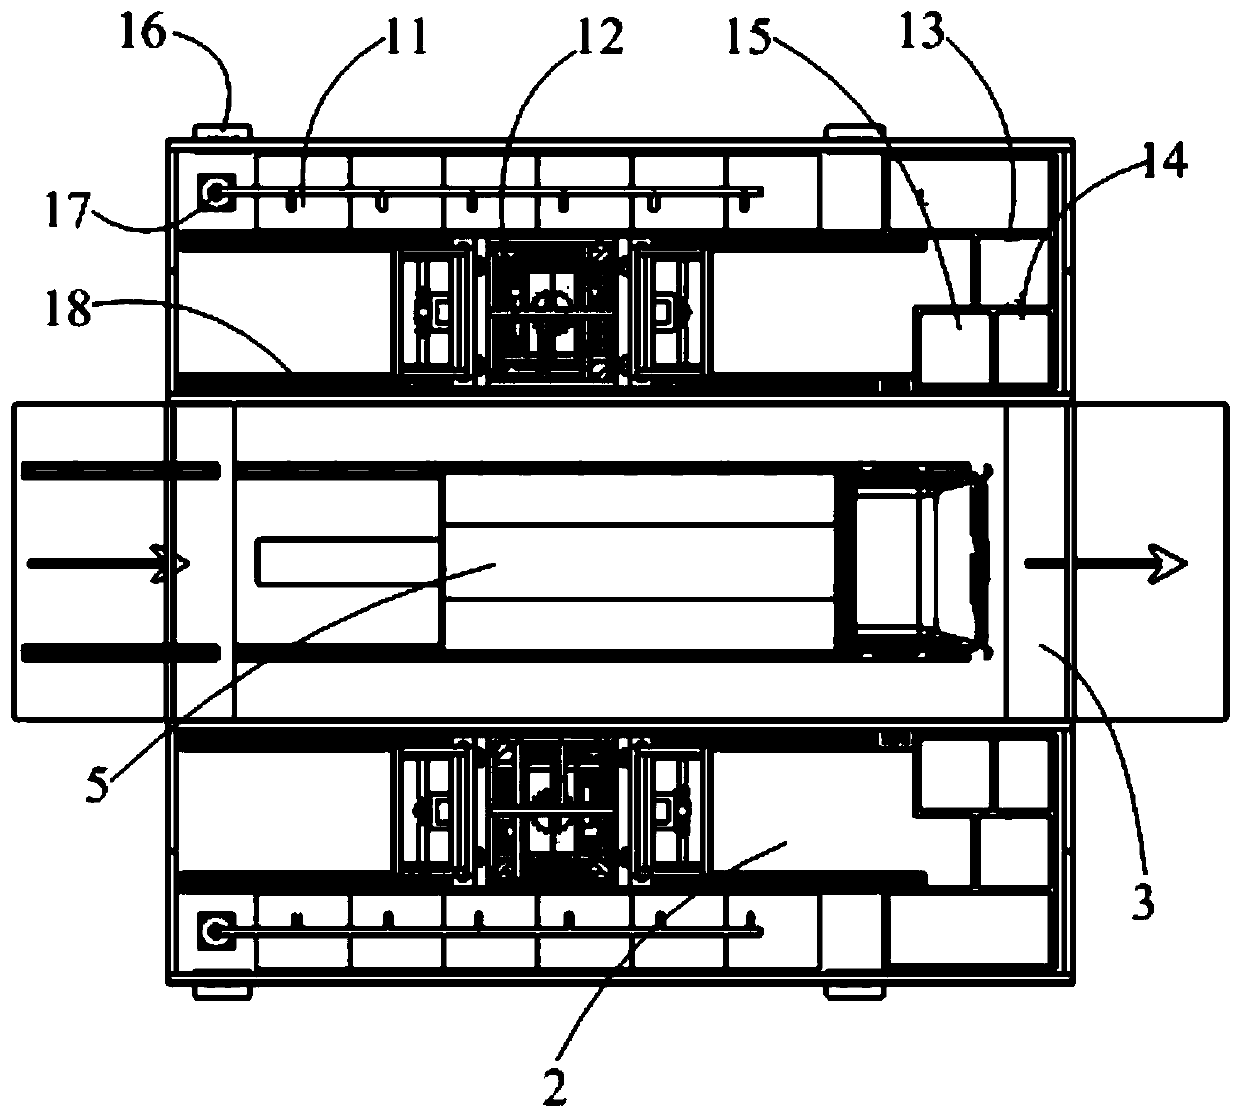 Two-side full automatic battery swap station capable of compatibility of multiple vehicle types